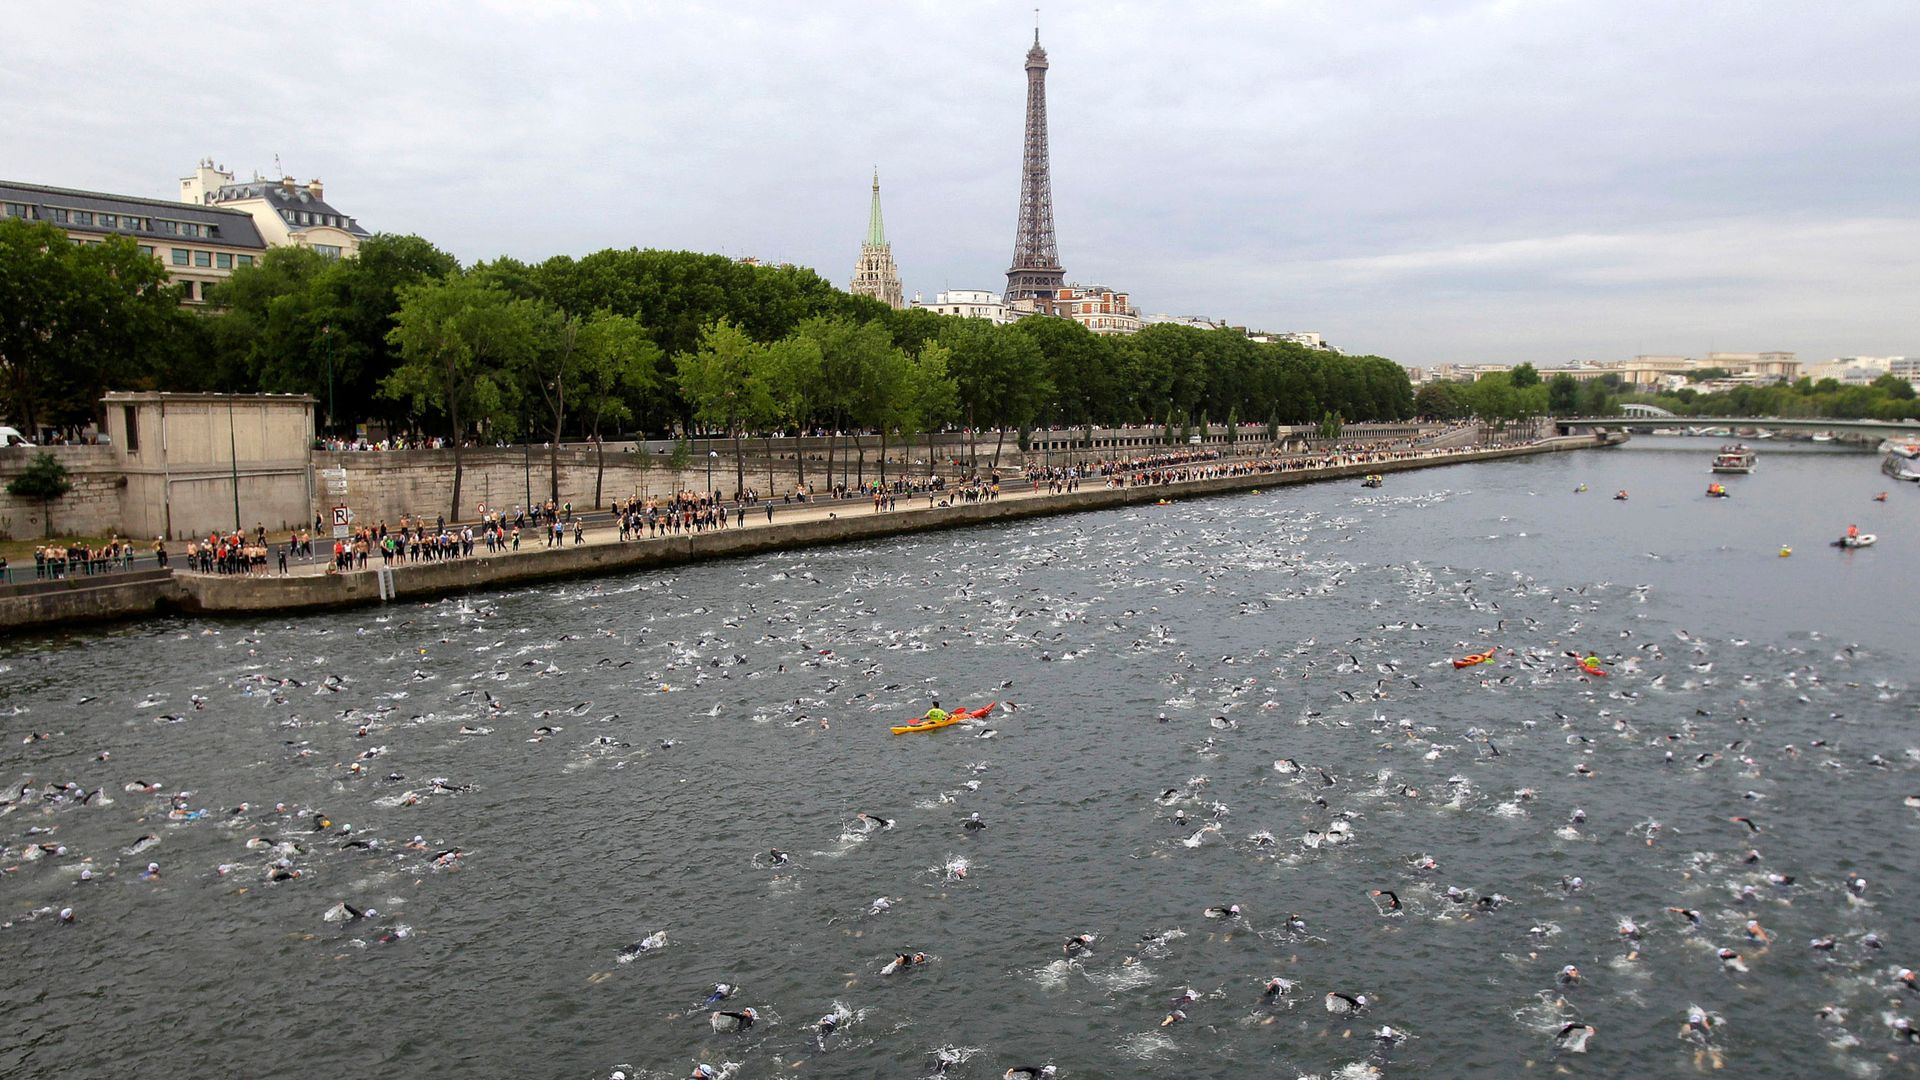 People are threatening to poo in Paris river - here's why